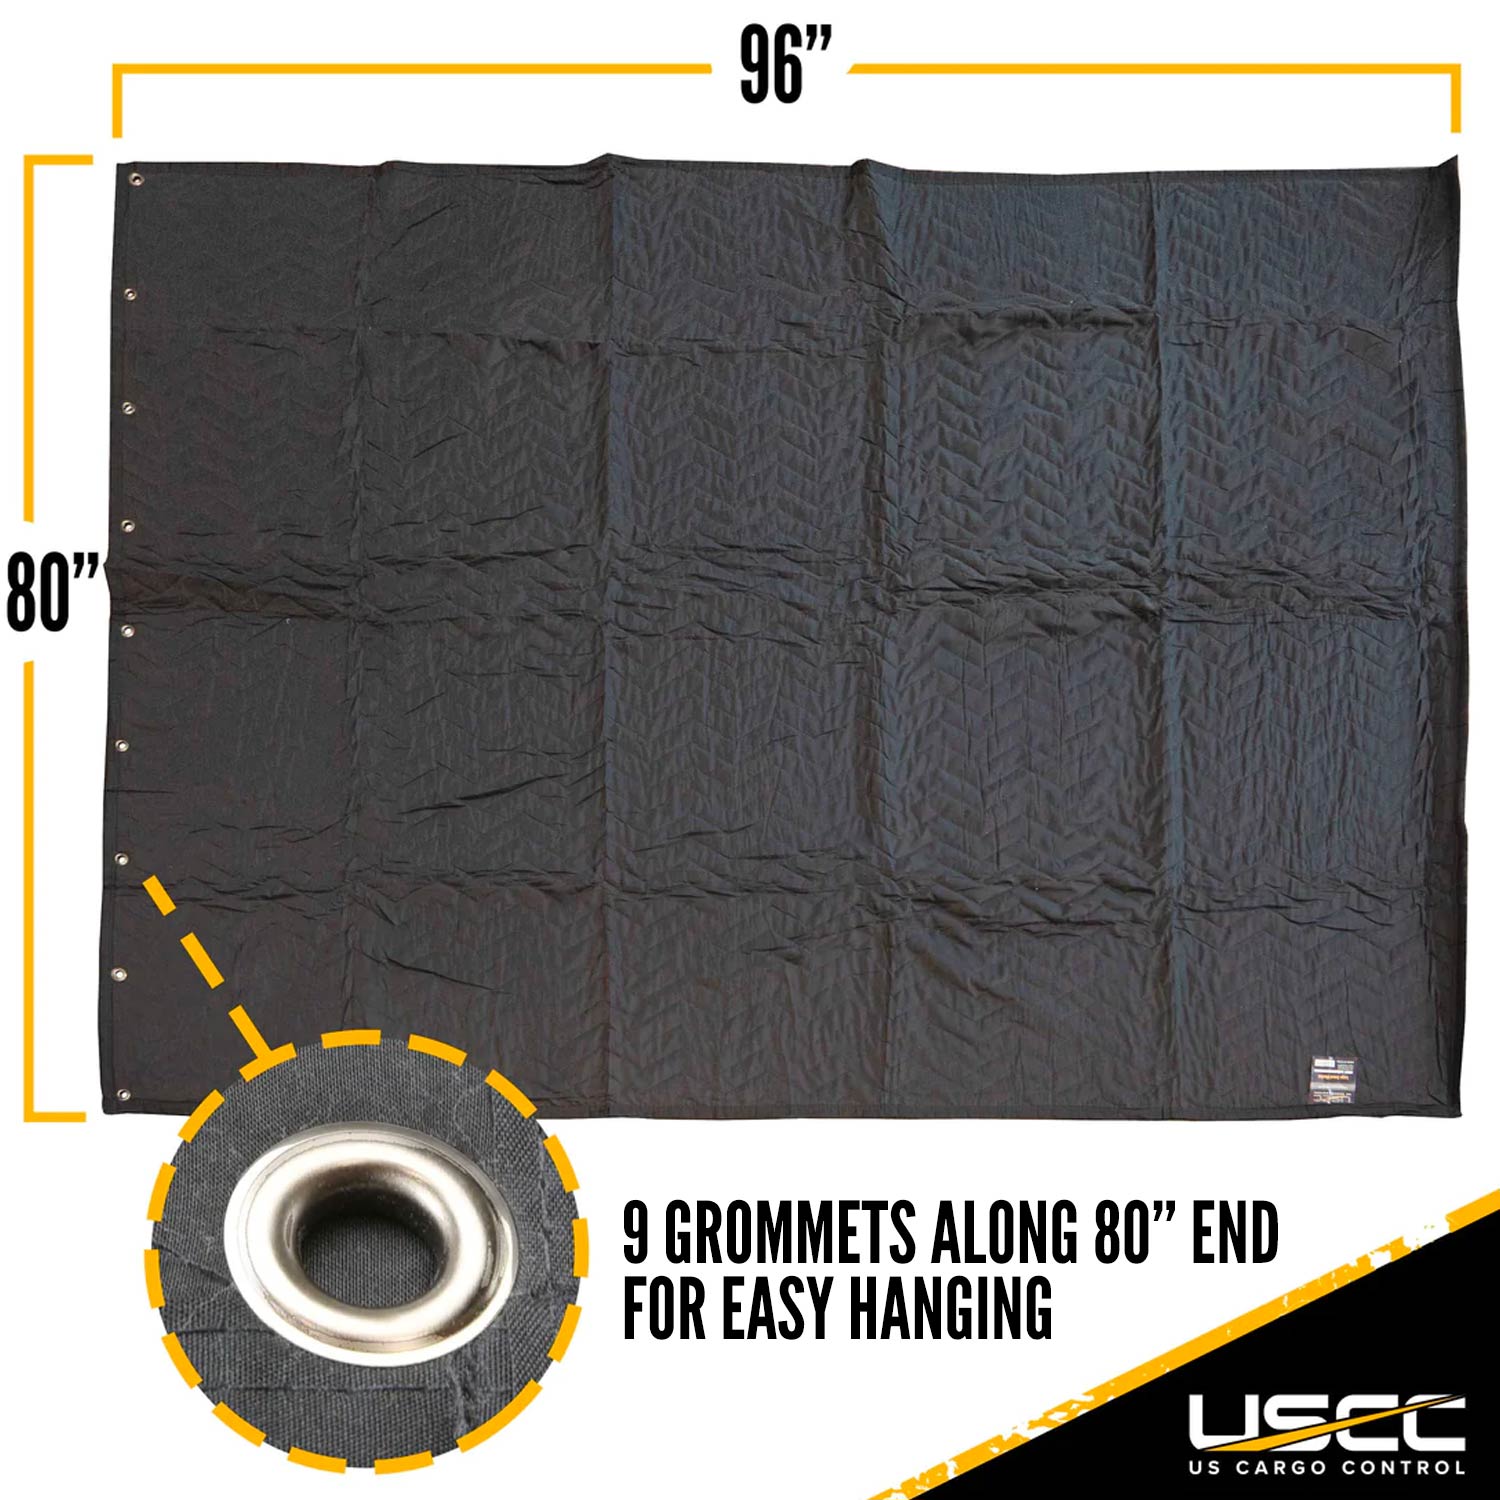 BoxerTools Studio Grommeted Sound Dampening Blanket 72 in. x 78 in. Light  Blocker, Acoustic Blanket, Wall Hanging, Sound Reducing, Large Size